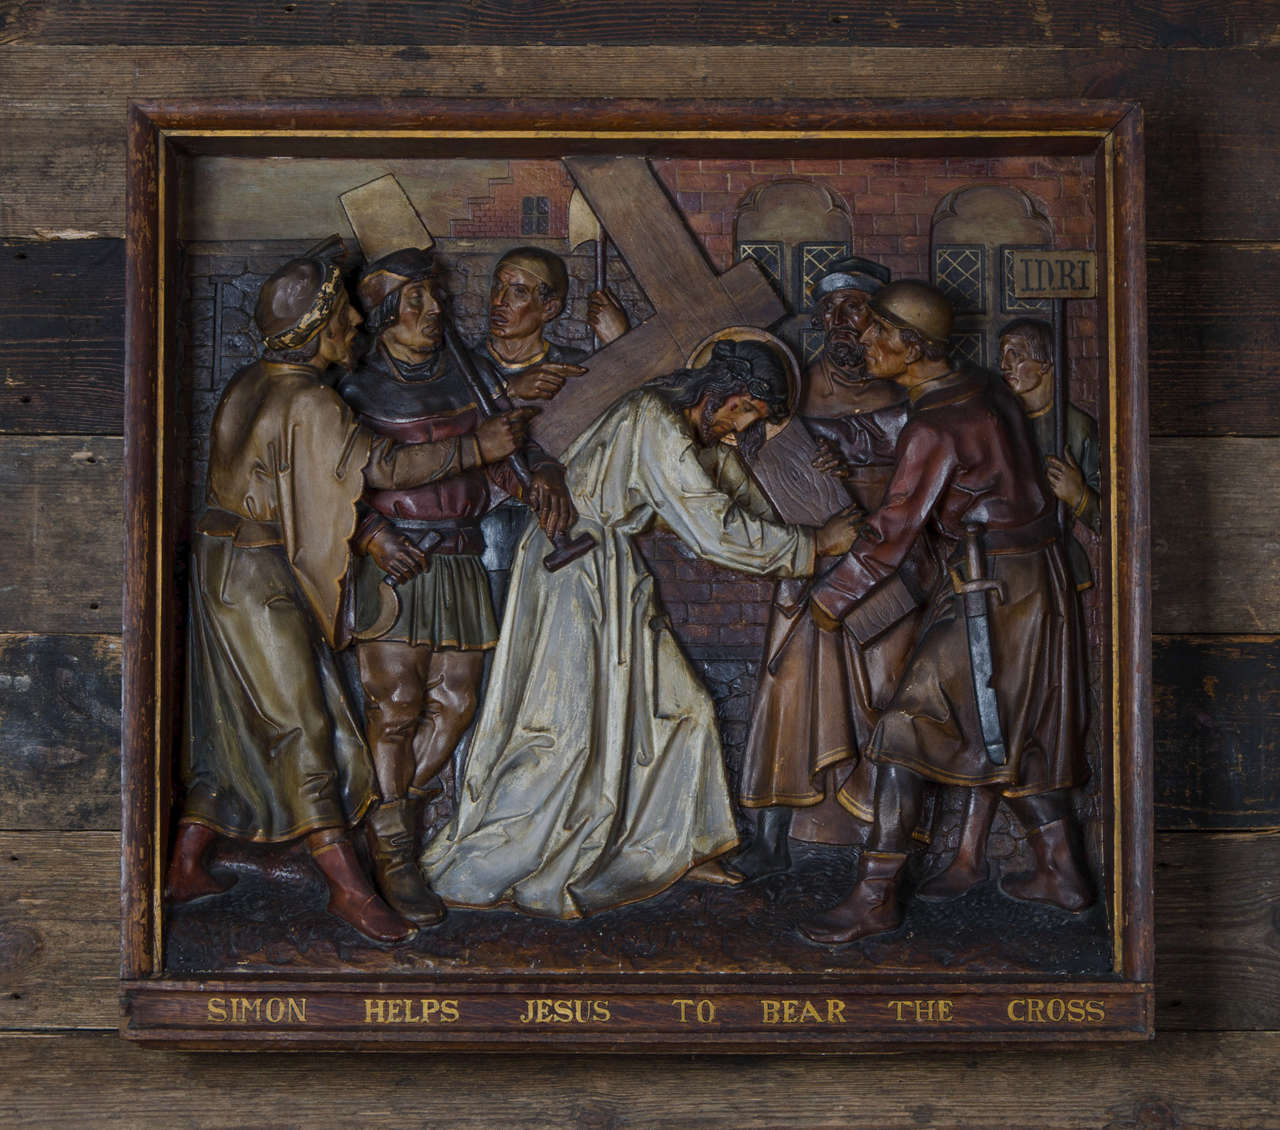 A set of eight Stations of the Cross salvaged from an old London church. The plaques are expertly made in high relief from plaster and are hand-painted. They sit in deep wooden frames, each marked with which part of the story of the crucifixion they